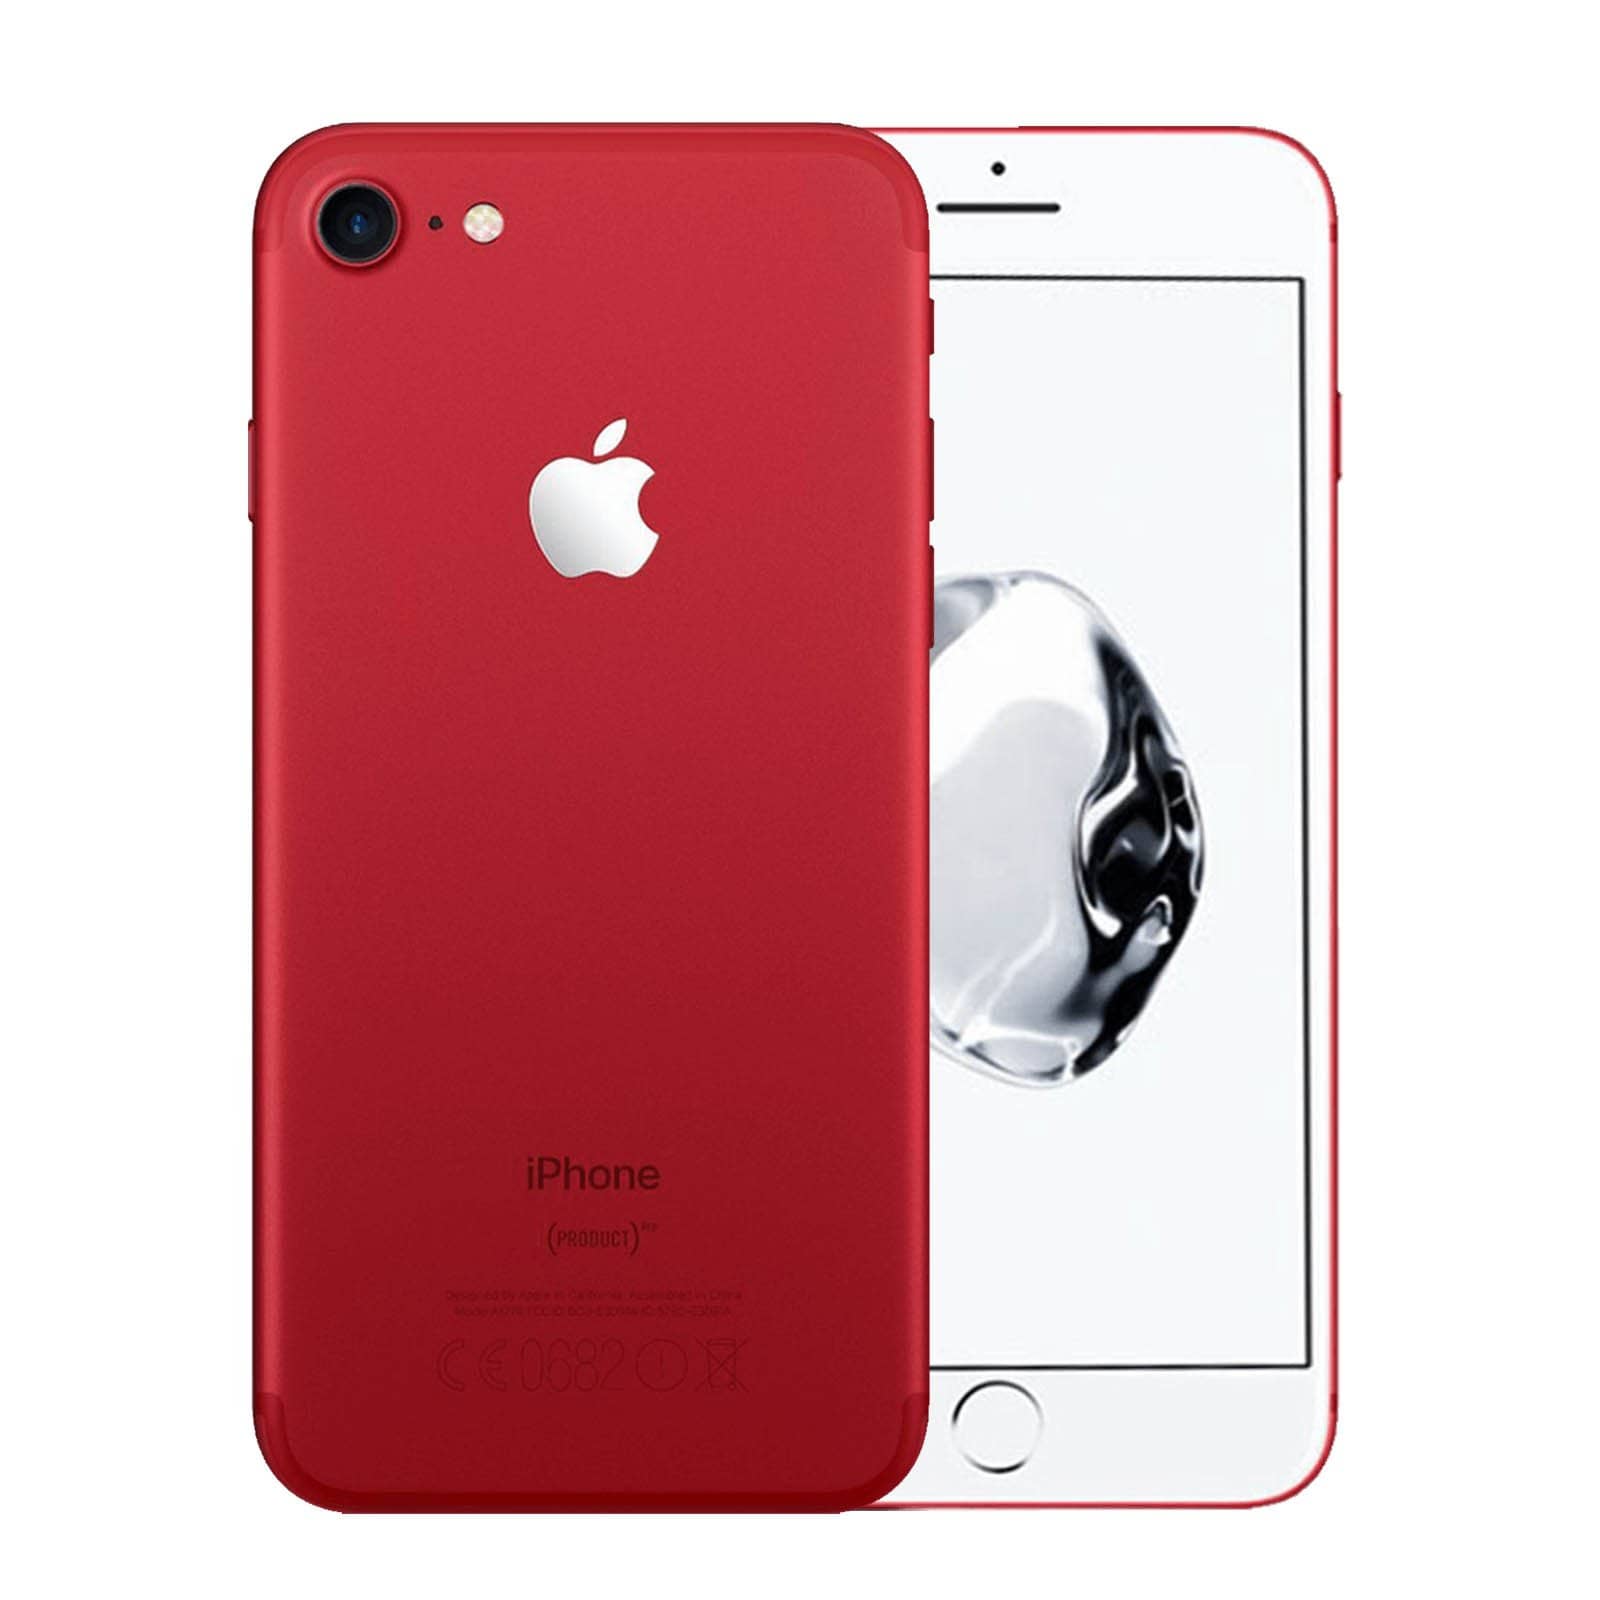 Apple iPhone 7 256GB Product Red Very Good - Unlocked 256GB Red Very Good